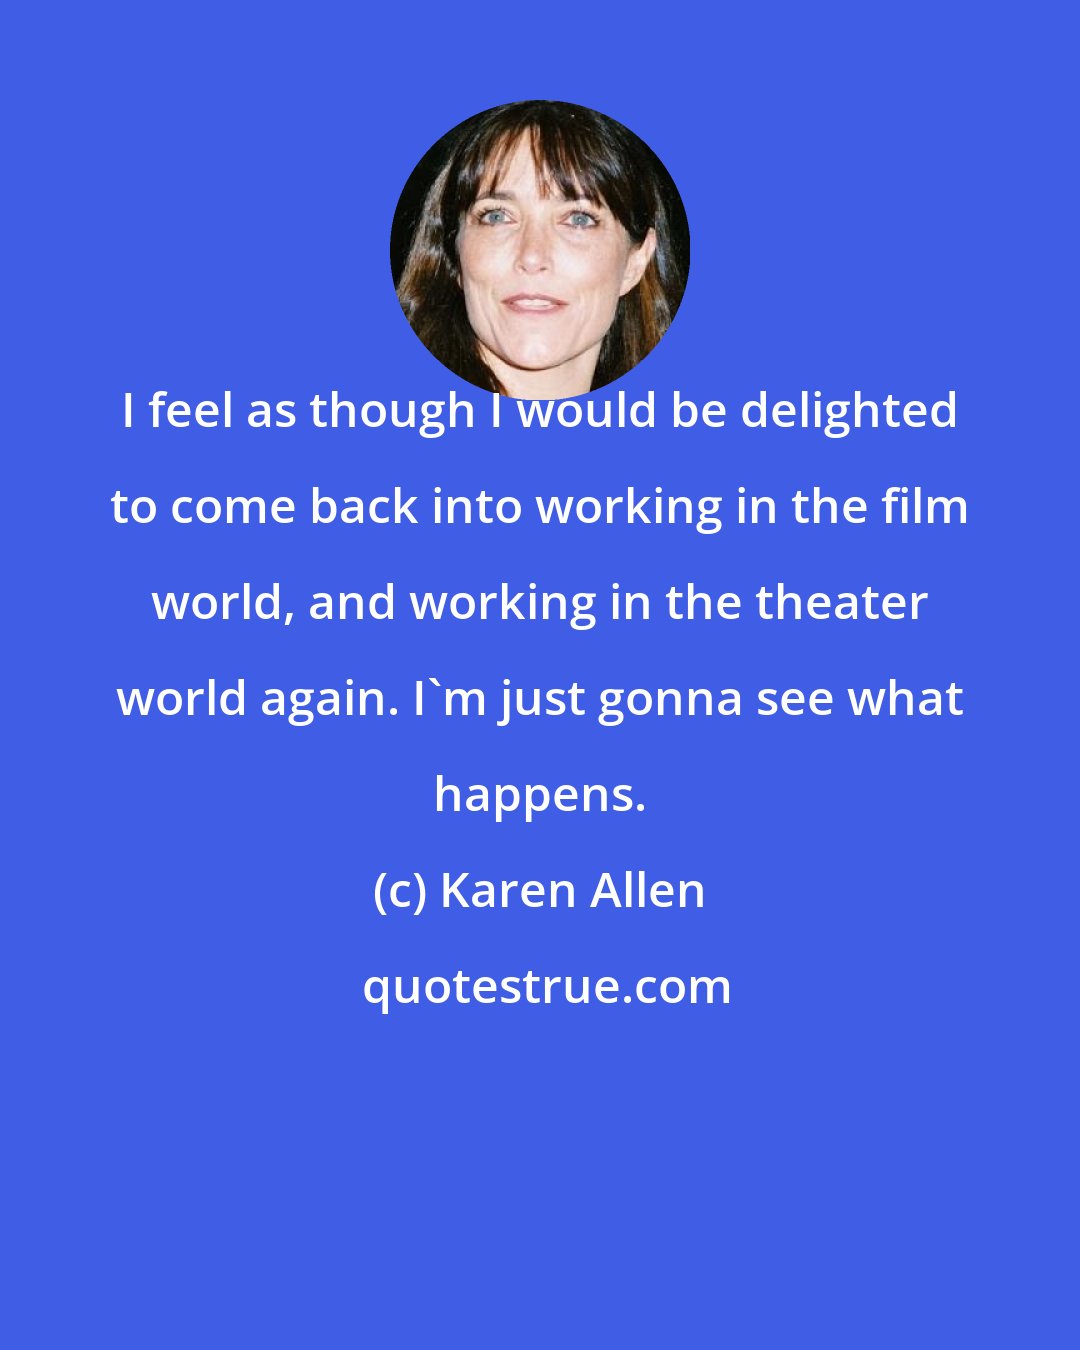 Karen Allen: I feel as though I would be delighted to come back into working in the film world, and working in the theater world again. I'm just gonna see what happens.